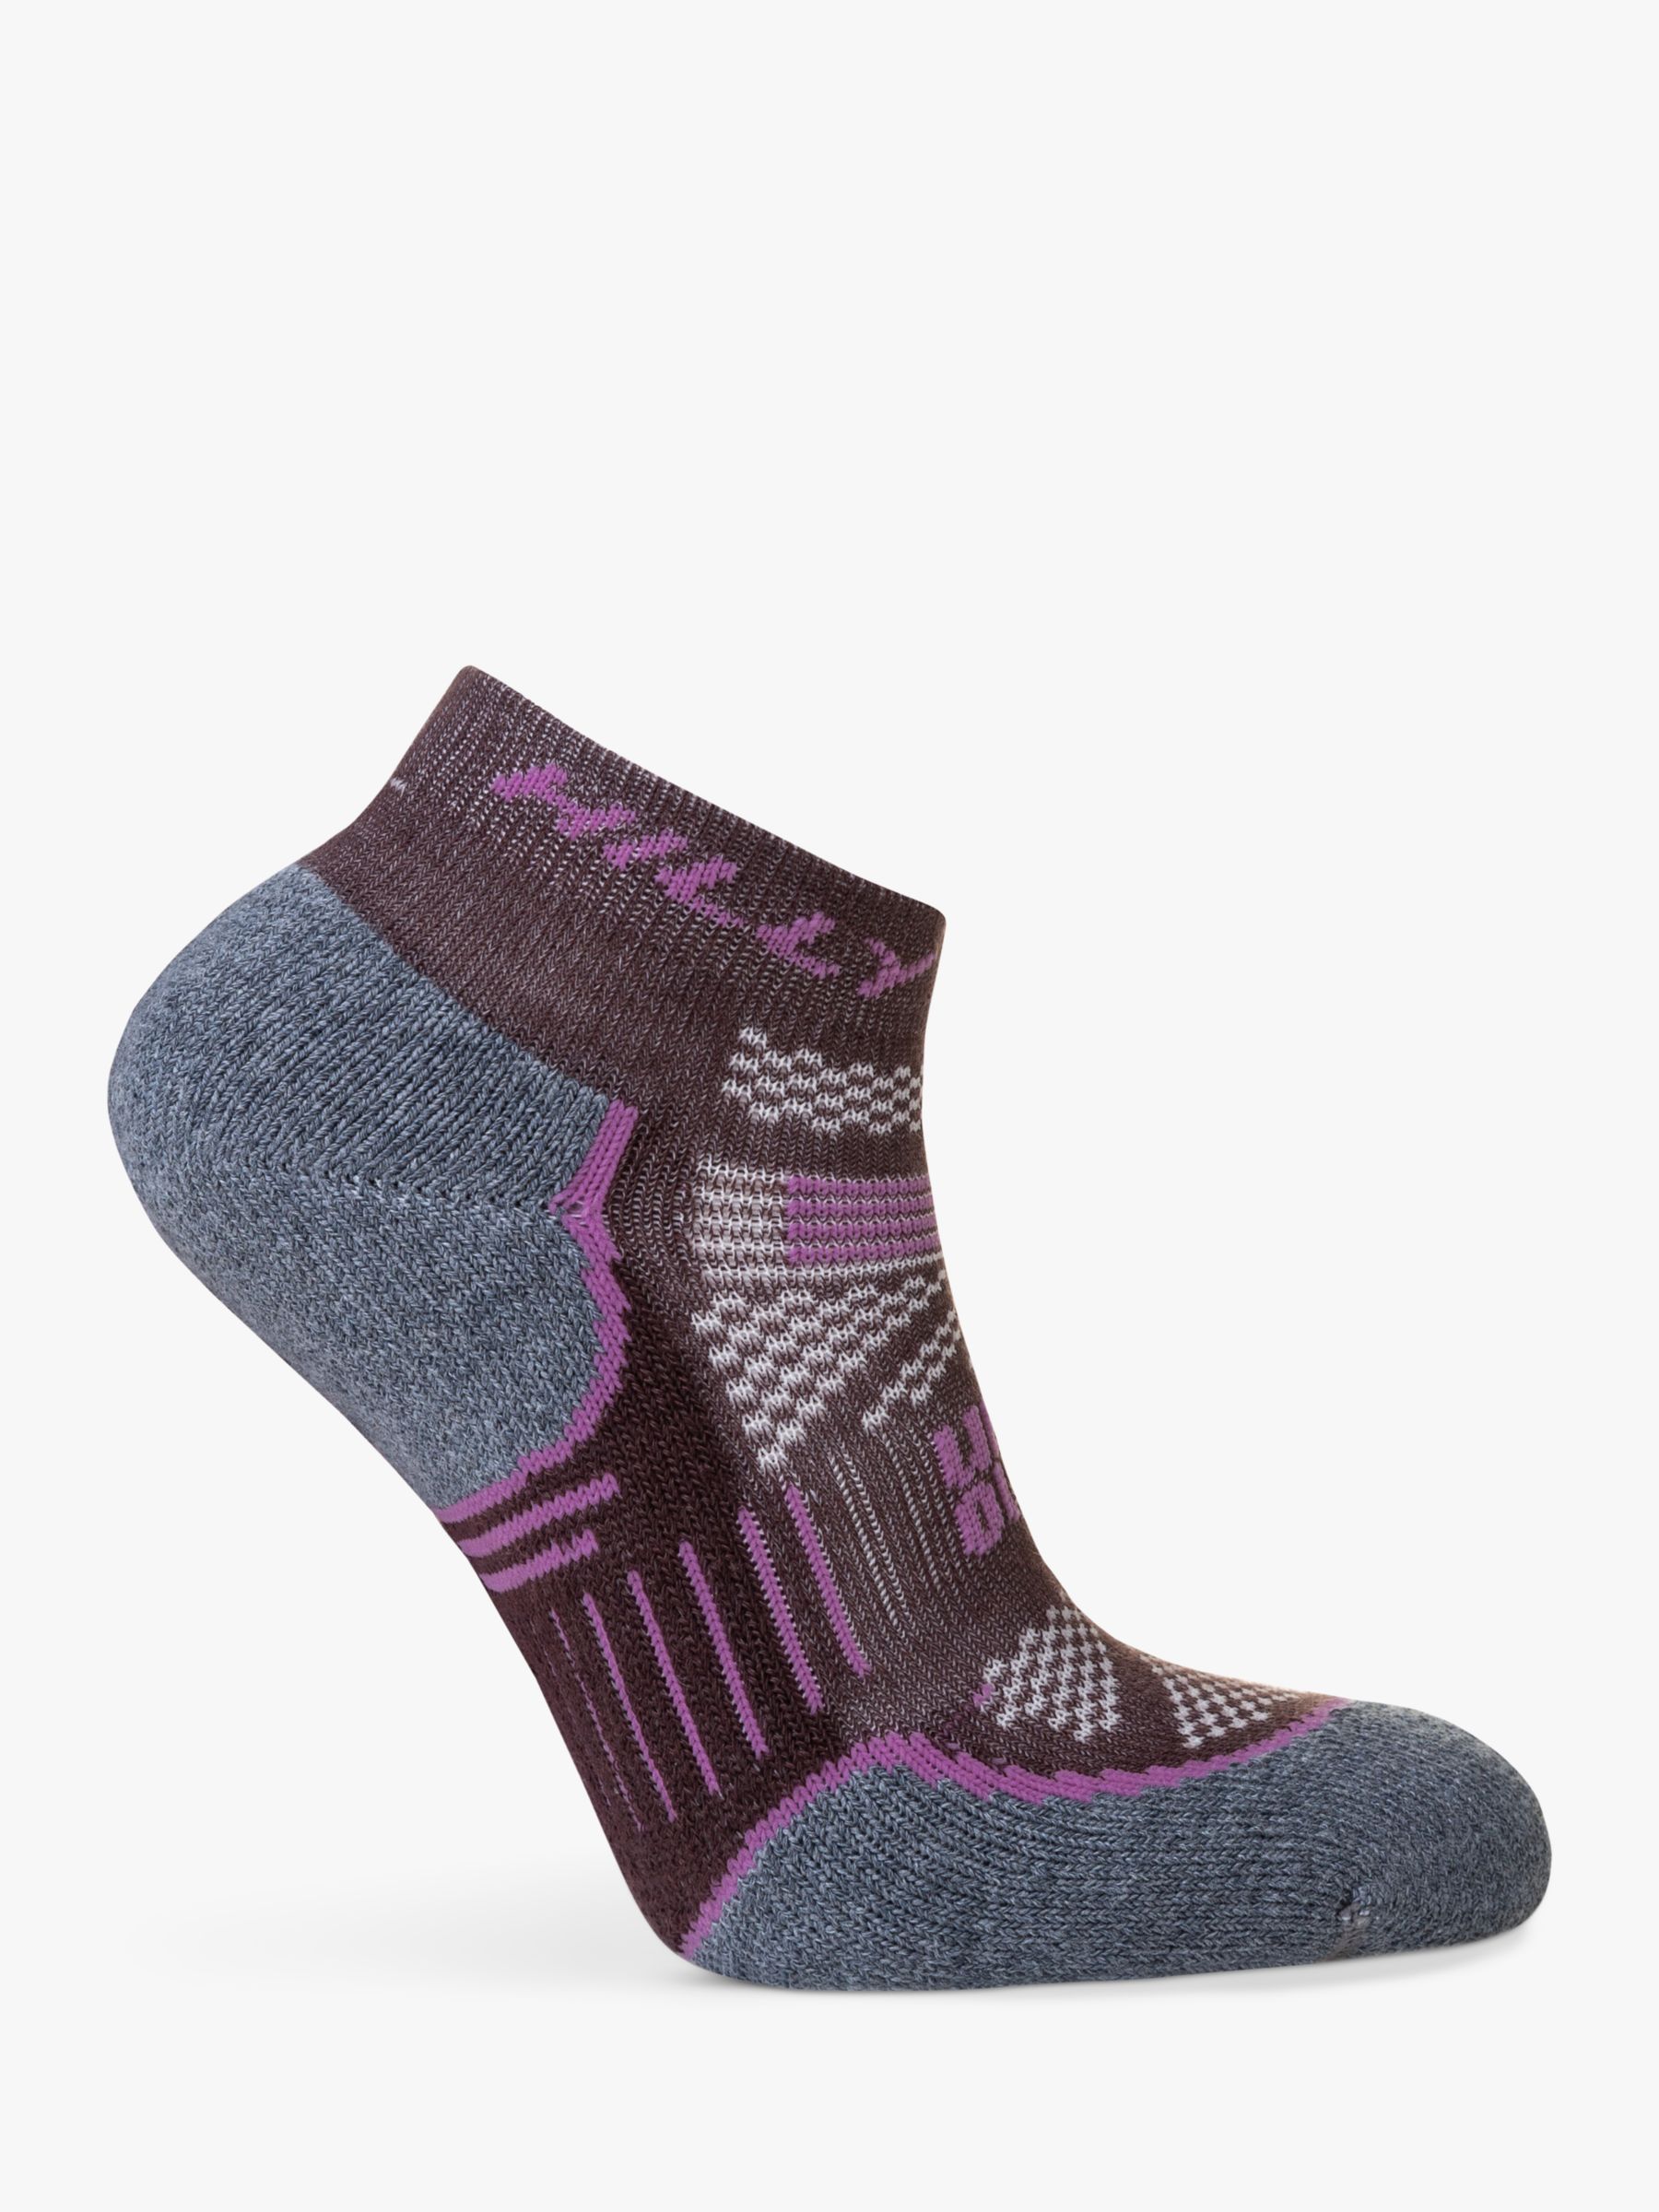 Hilly Supreme Ankle Running Socks, Cocoa/Heather, S